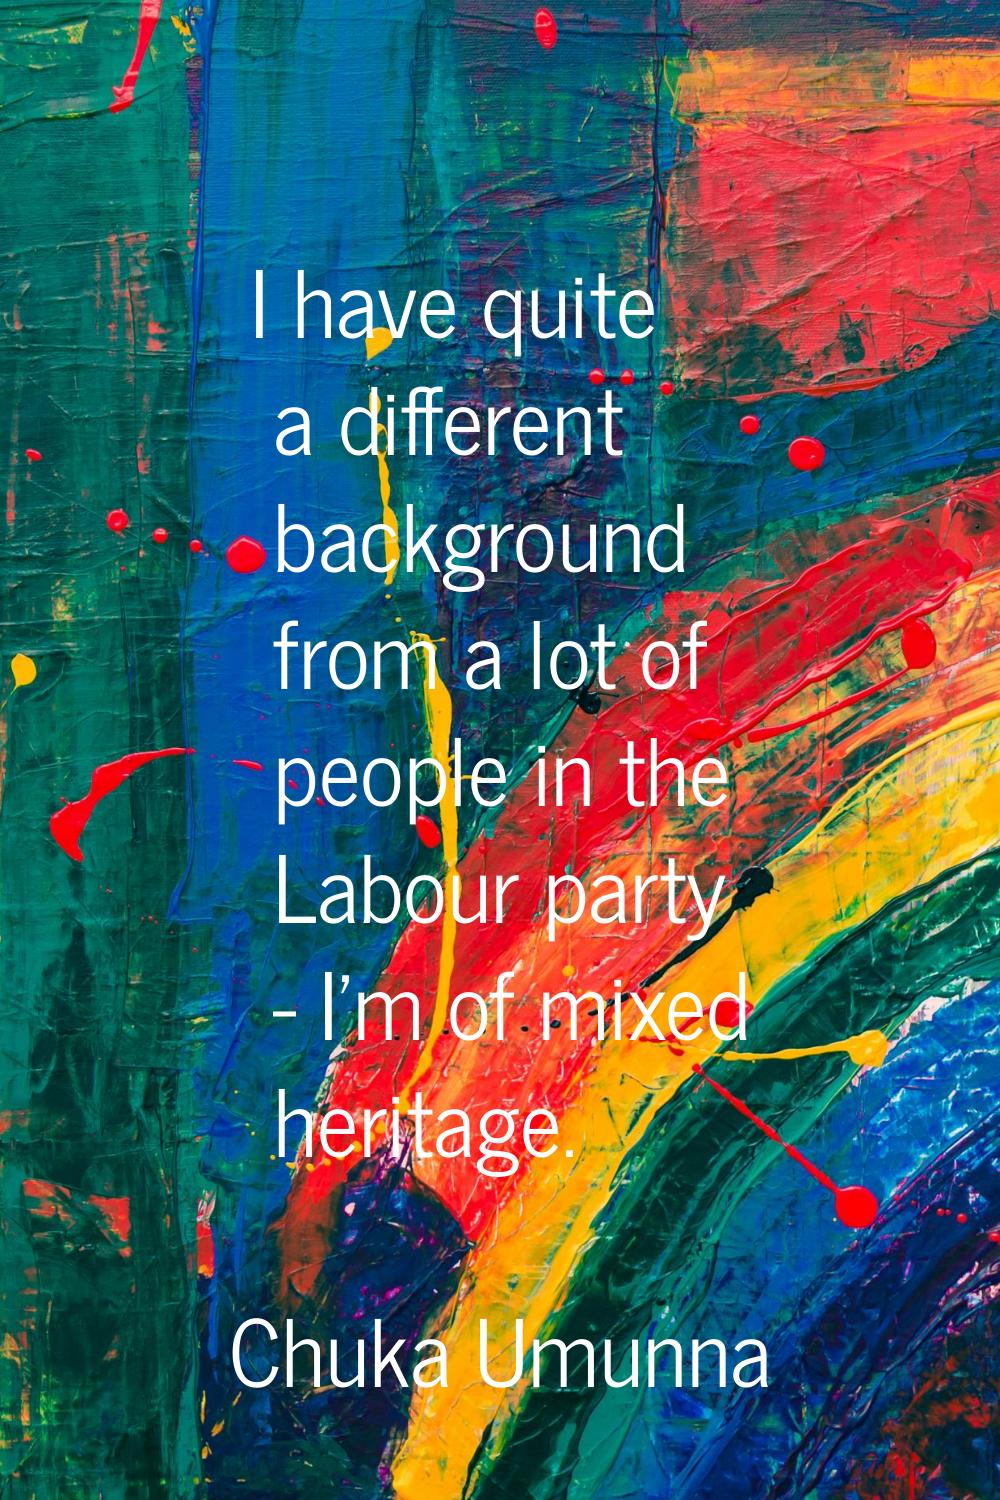 I have quite a different background from a lot of people in the Labour party - I'm of mixed heritag